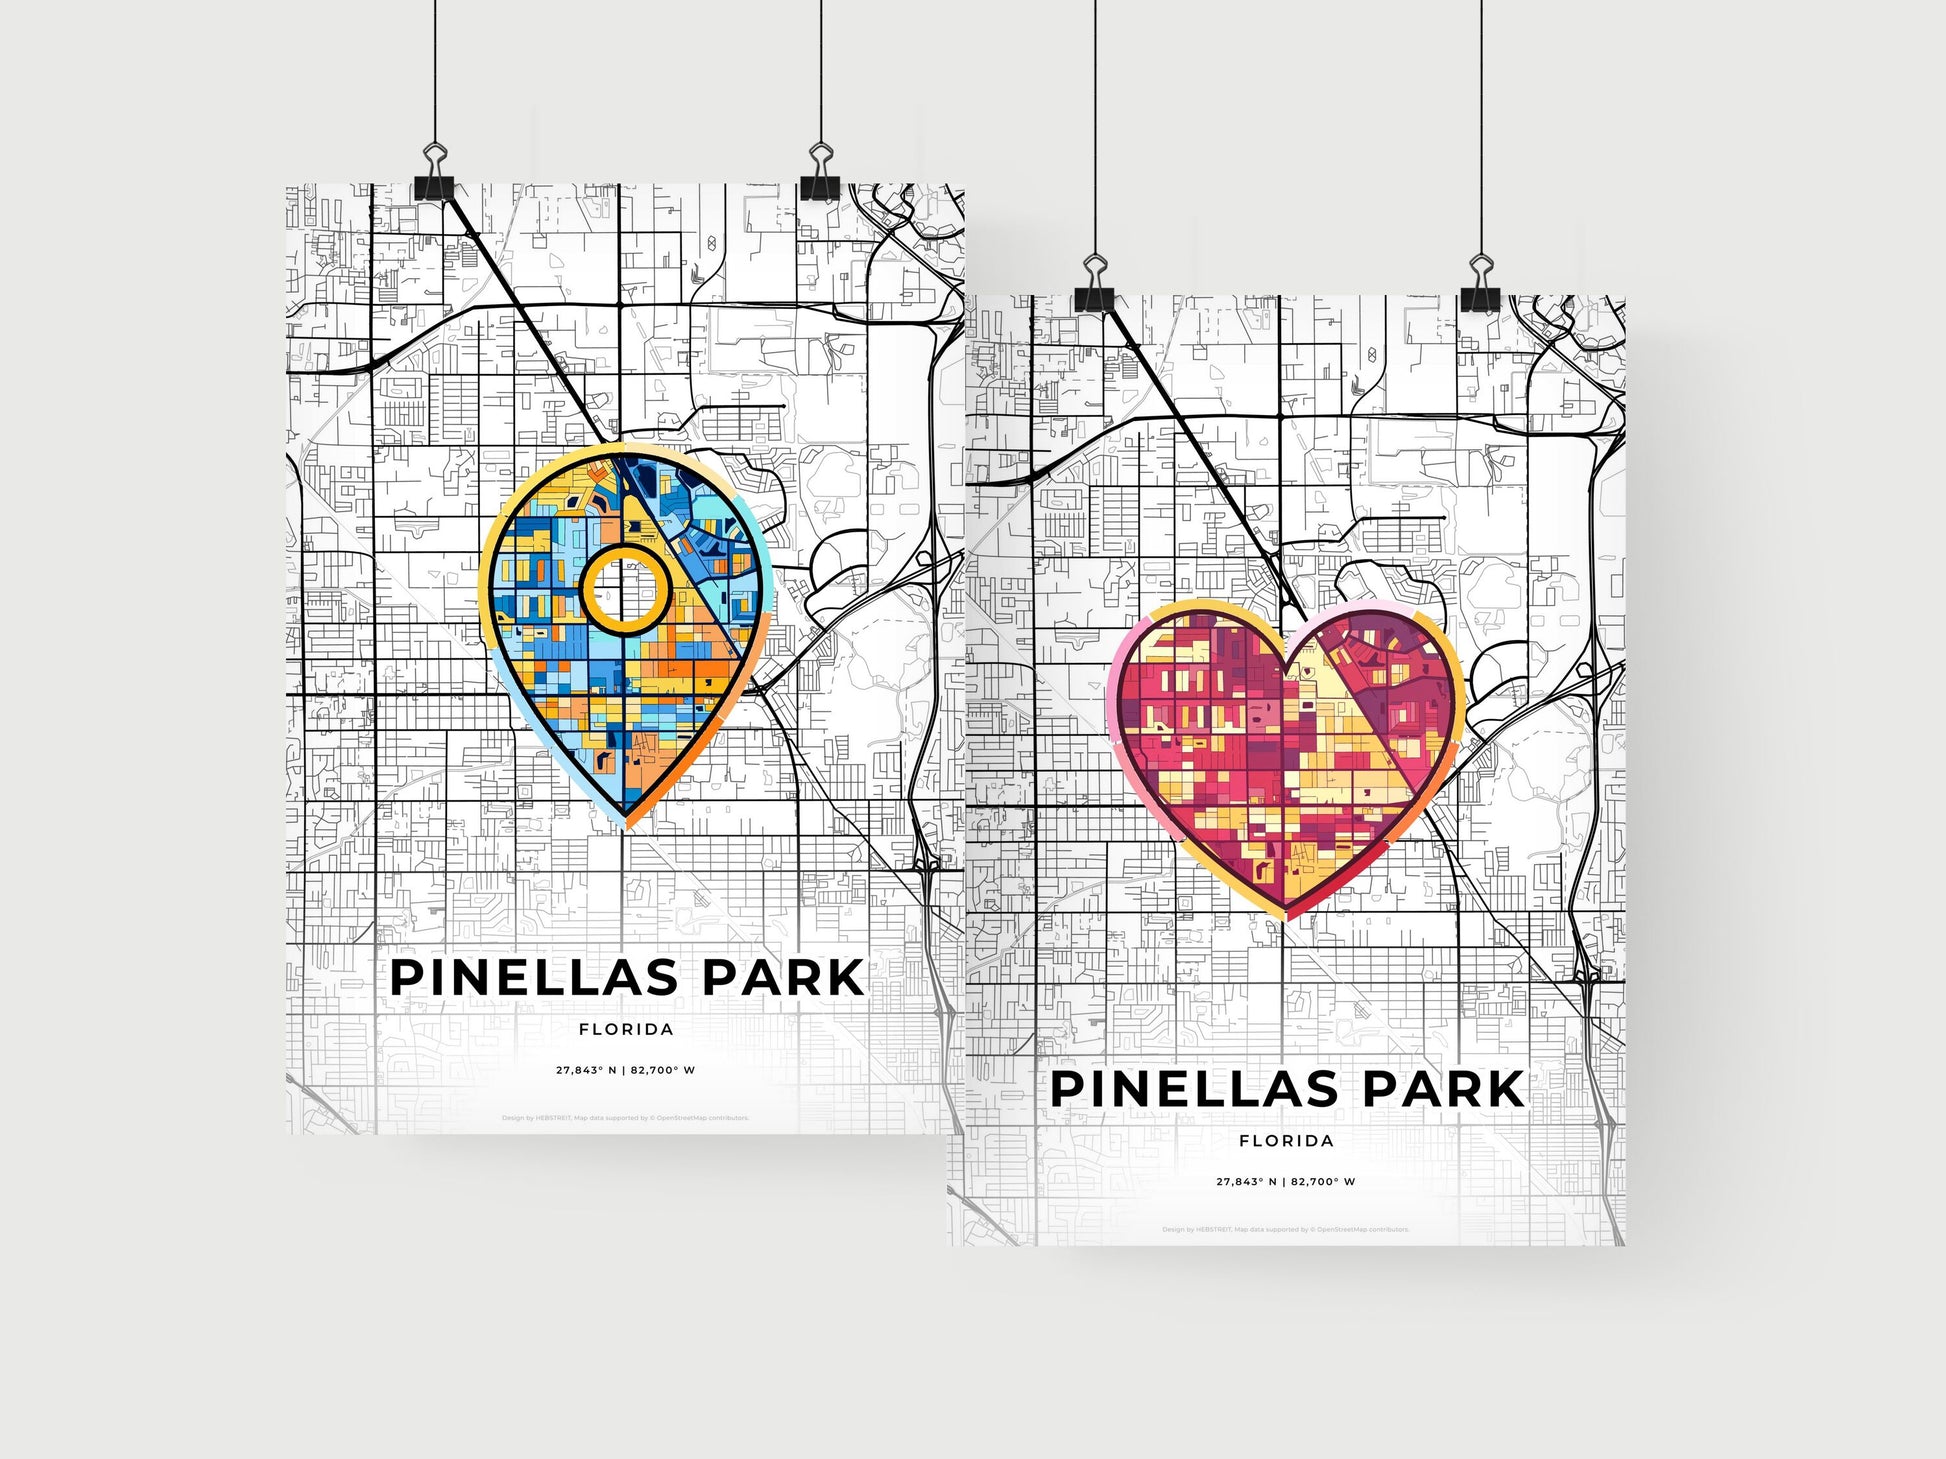 PINELLAS PARK FLORIDA minimal art map with a colorful icon.